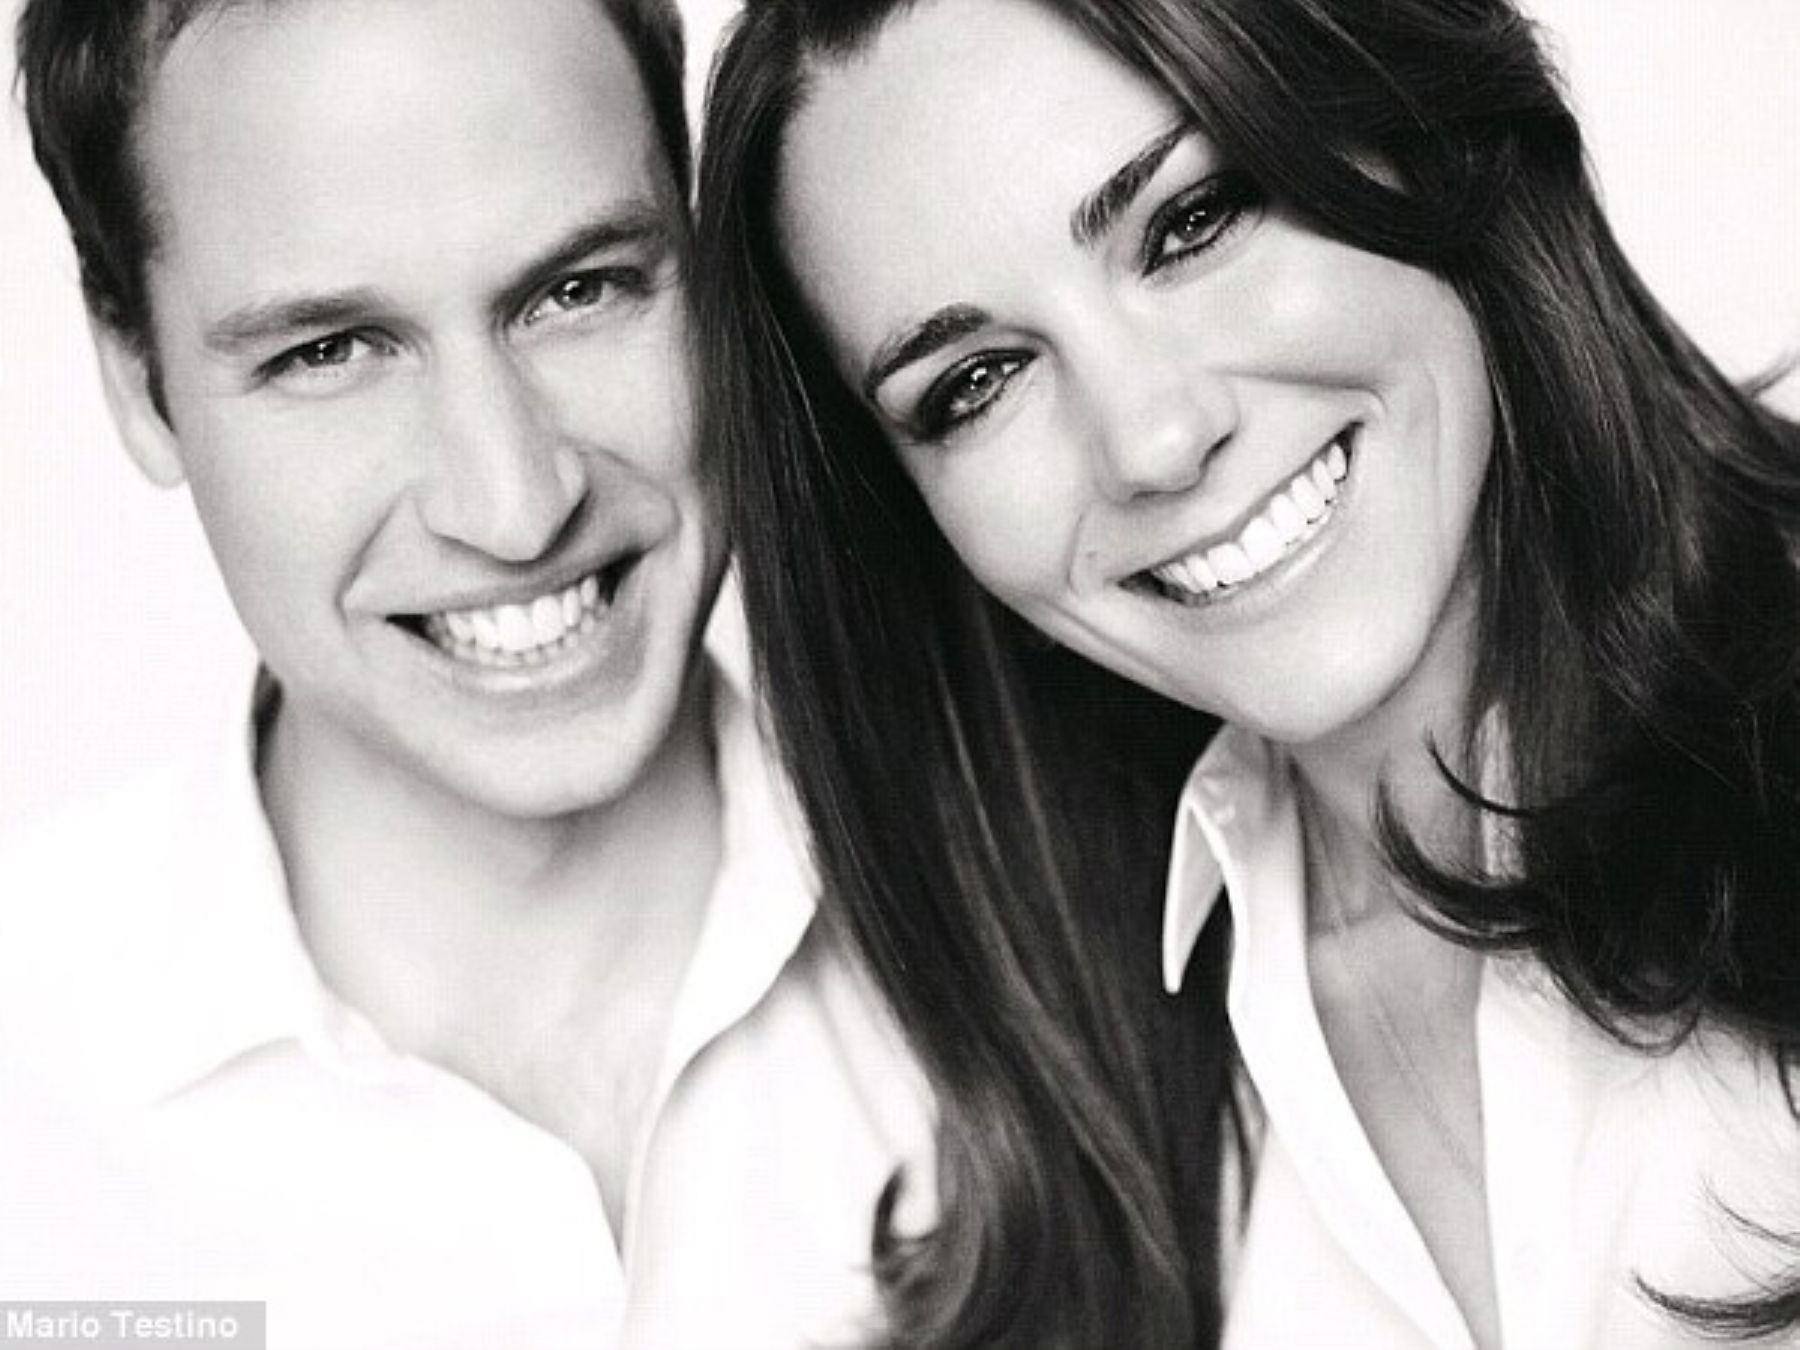 The Mario Testino-photographed official royal wedding program portrait of Prince William and Kate Middleton